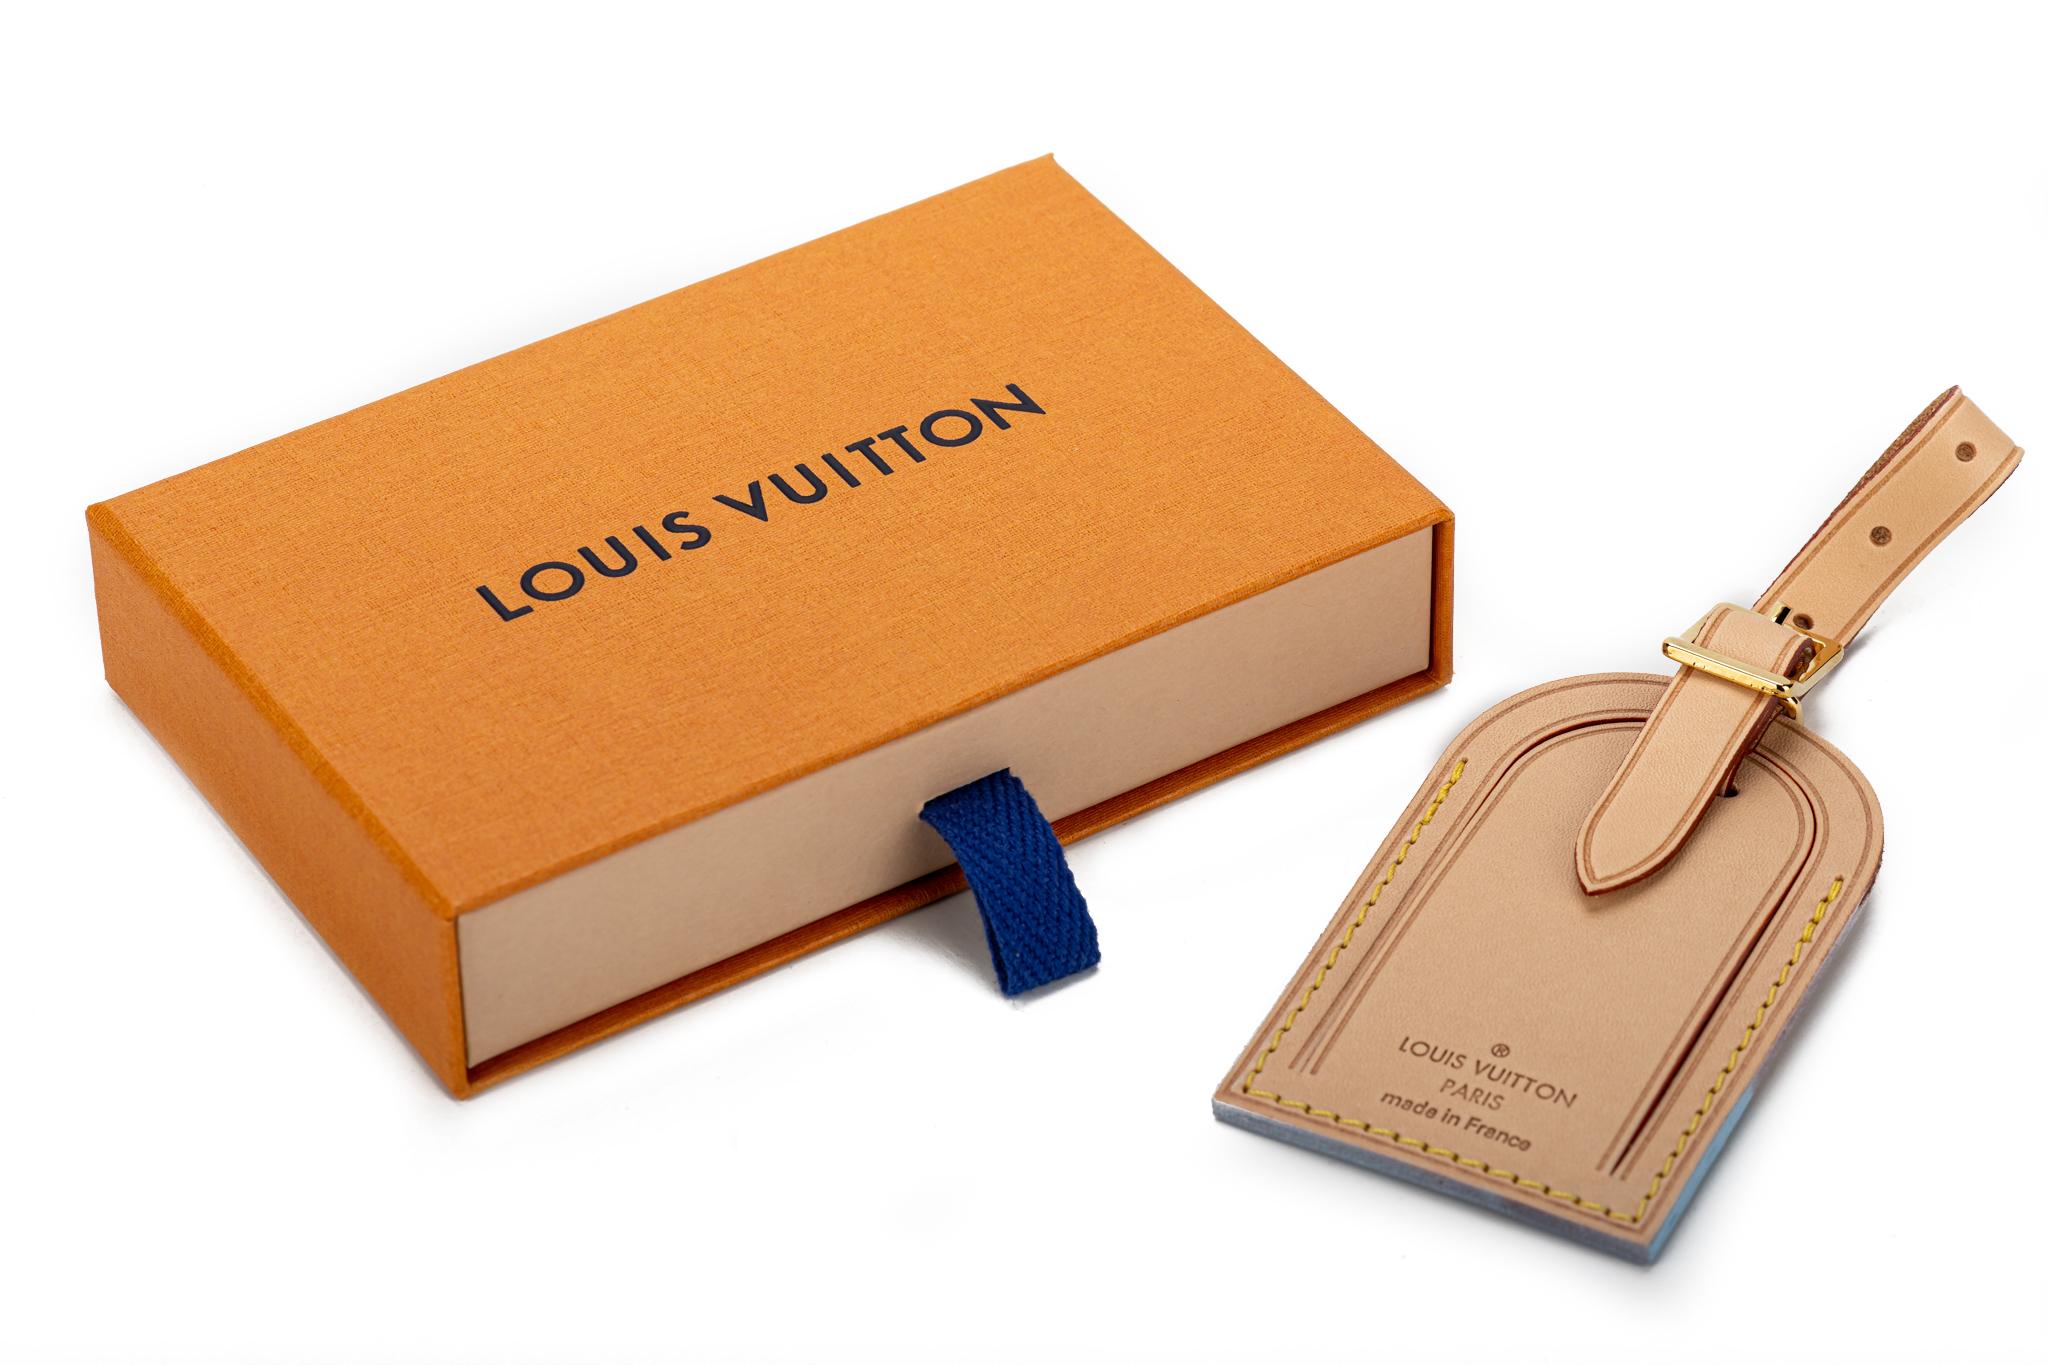 Louis Vuitton limited edition St Tropez name tag. Brand new with original box.